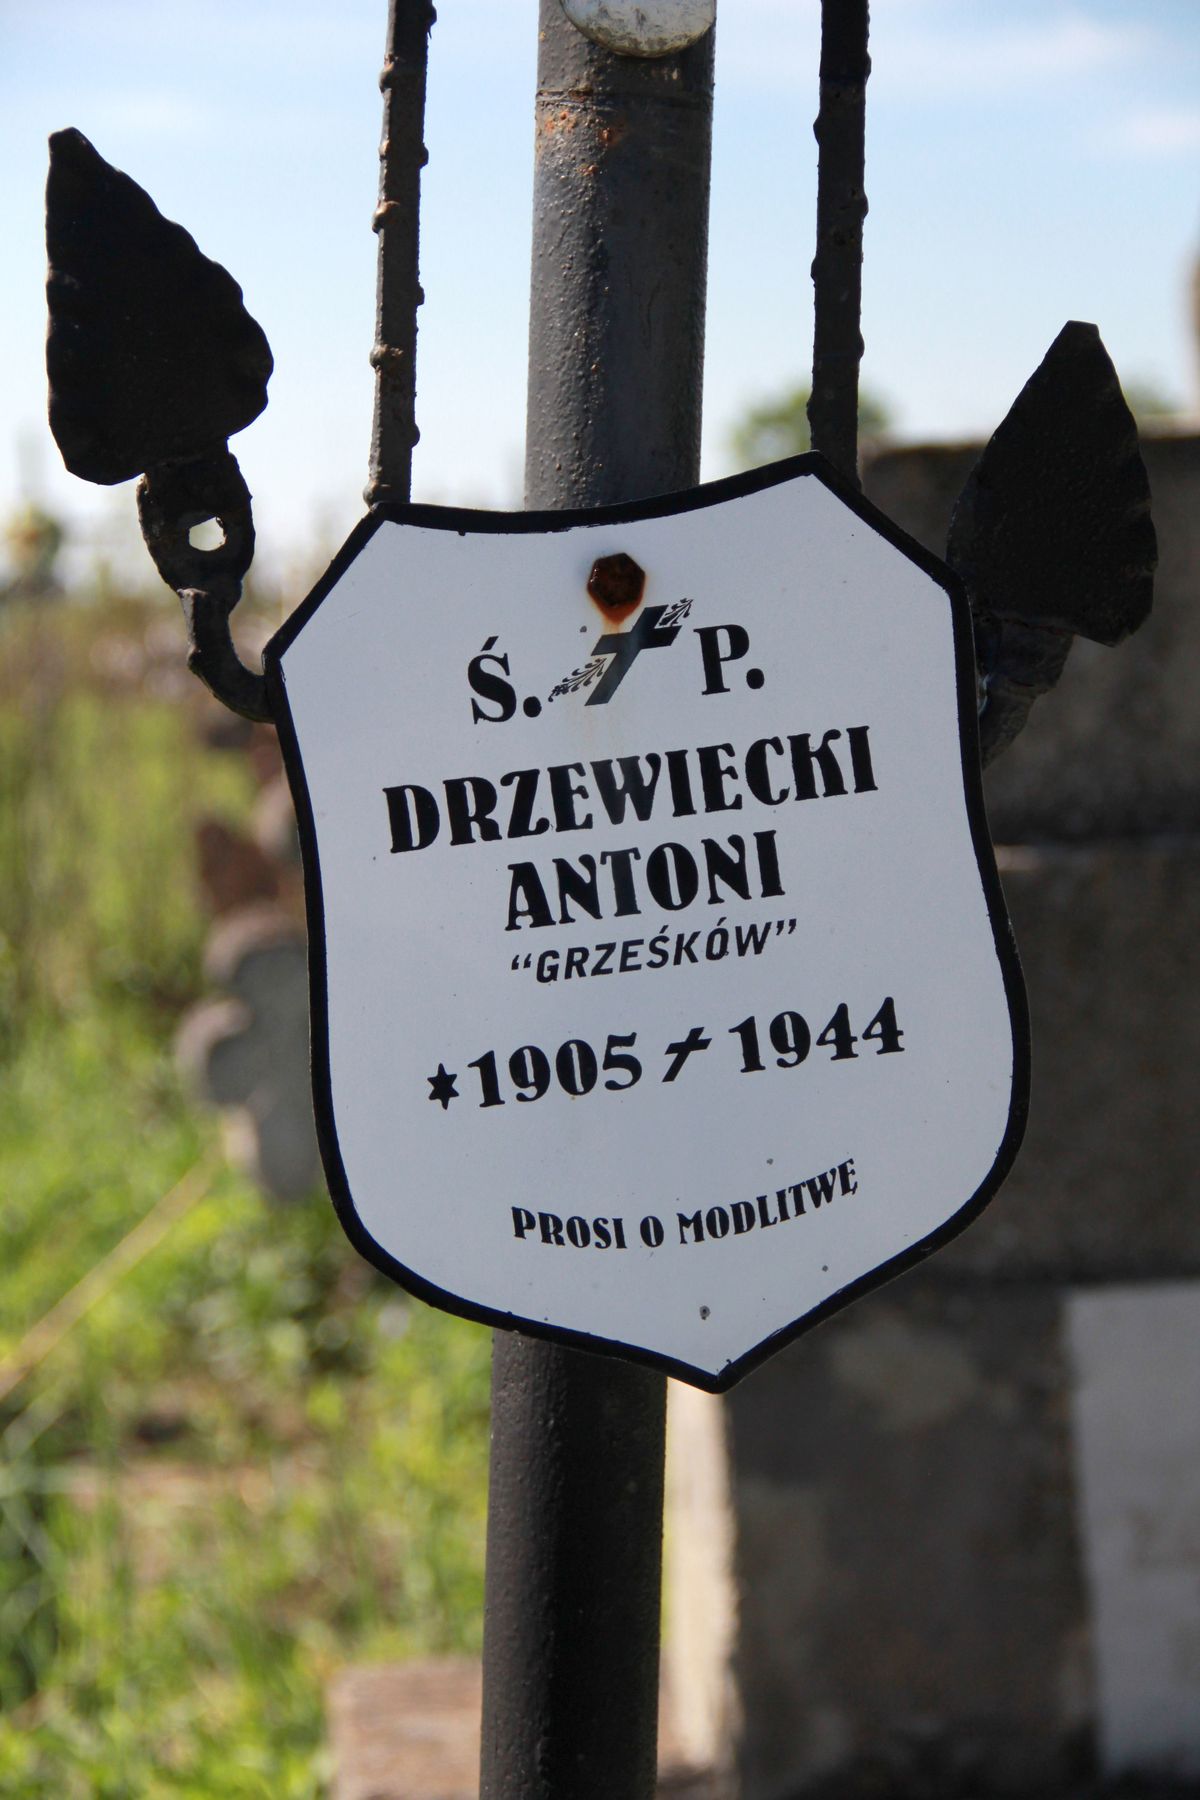 Inscription from the tombstone of Antoni Drzewiecki, Ihrownica cemetery